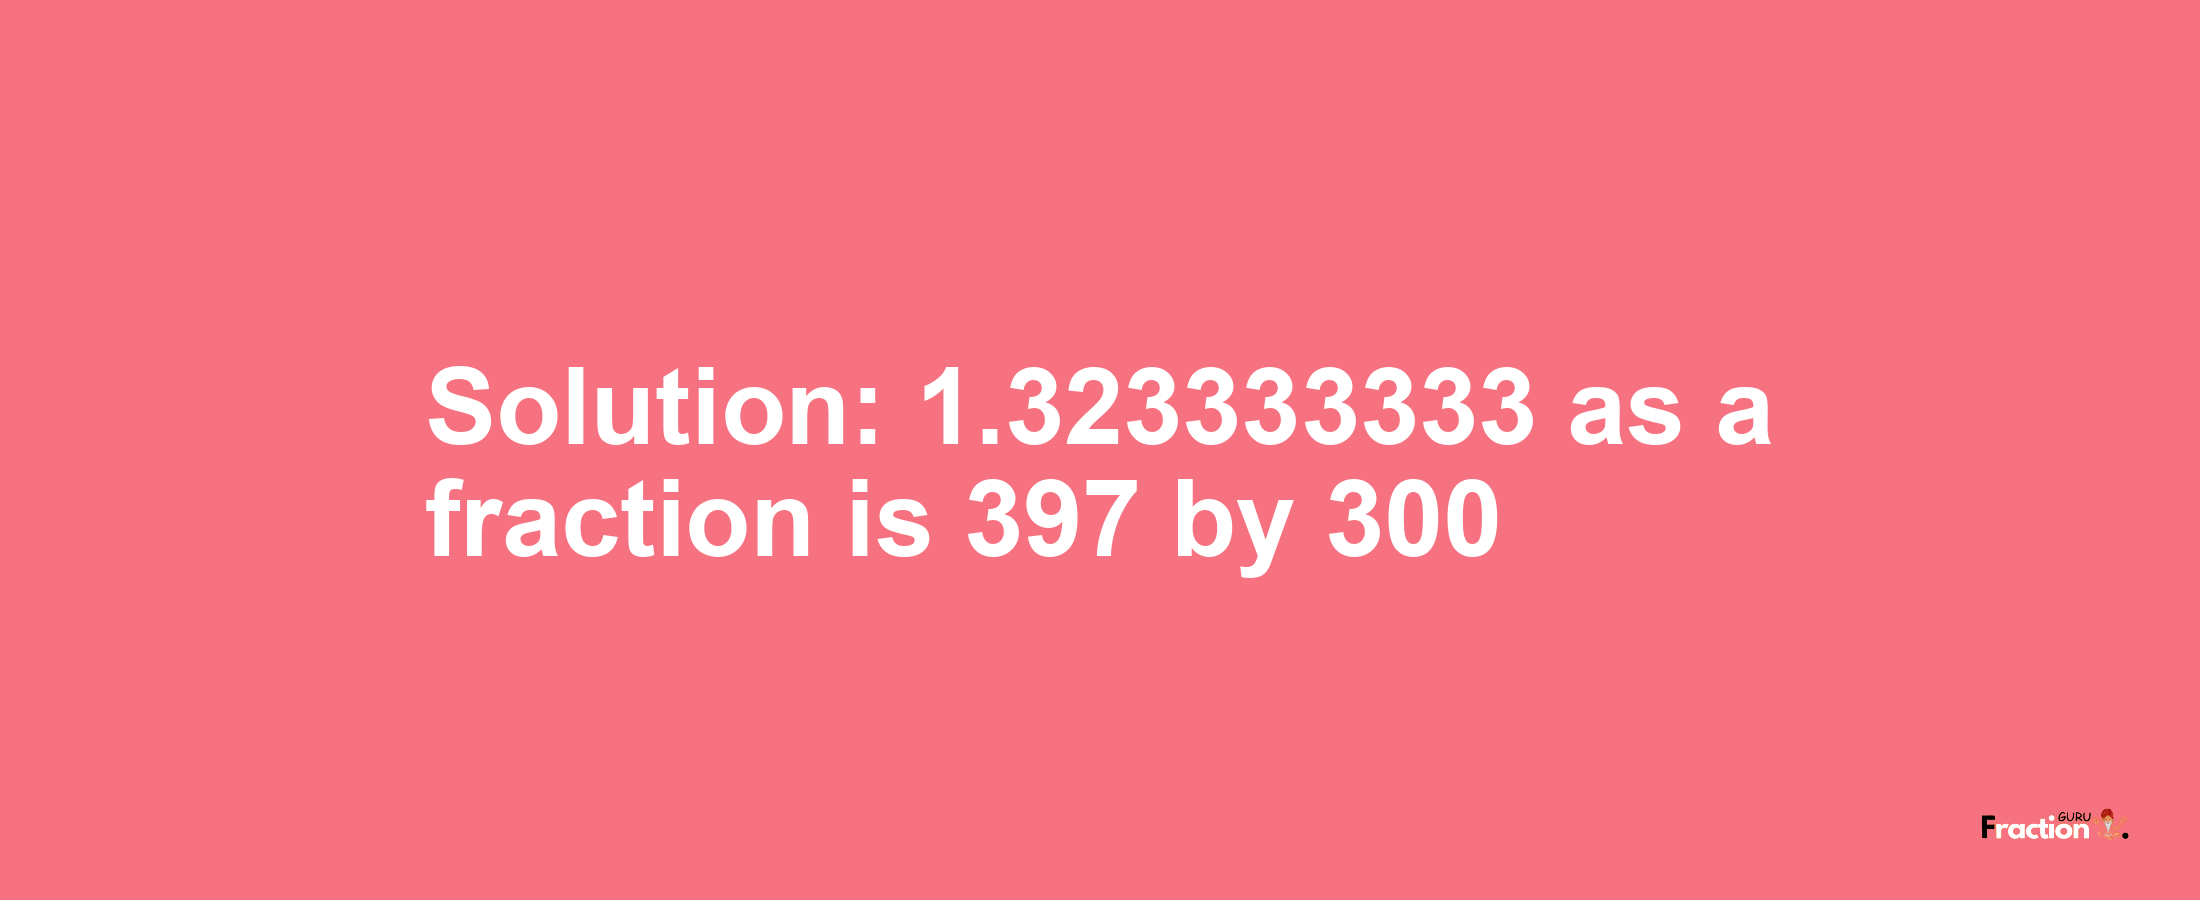 Solution:1.323333333 as a fraction is 397/300